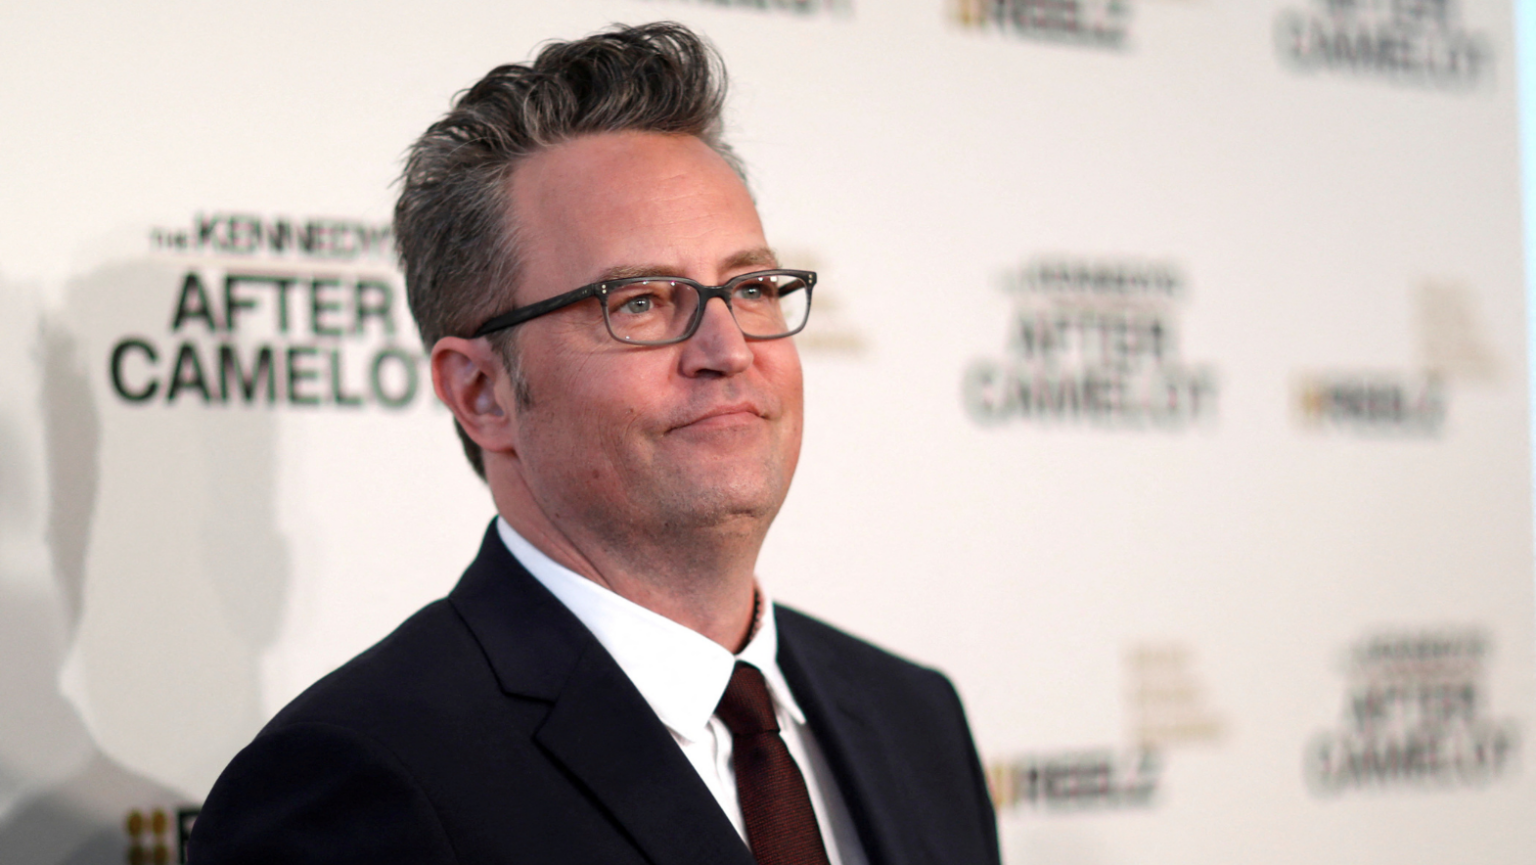 Police probes death of ‘Friends’ star Matthew Perry